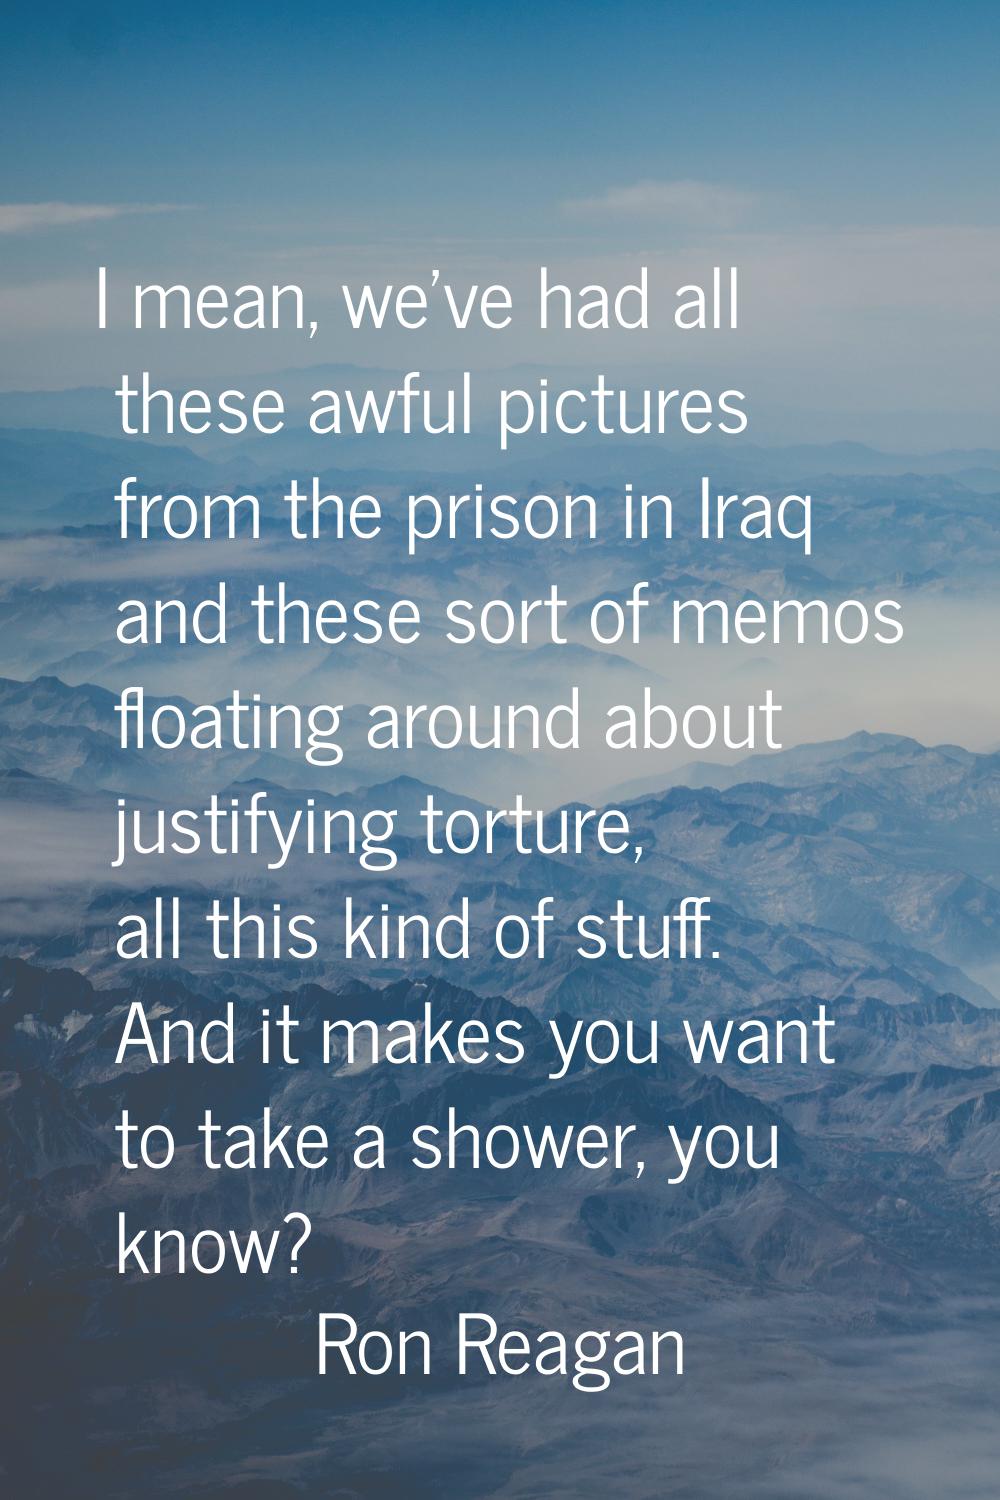 I mean, we've had all these awful pictures from the prison in Iraq and these sort of memos floating